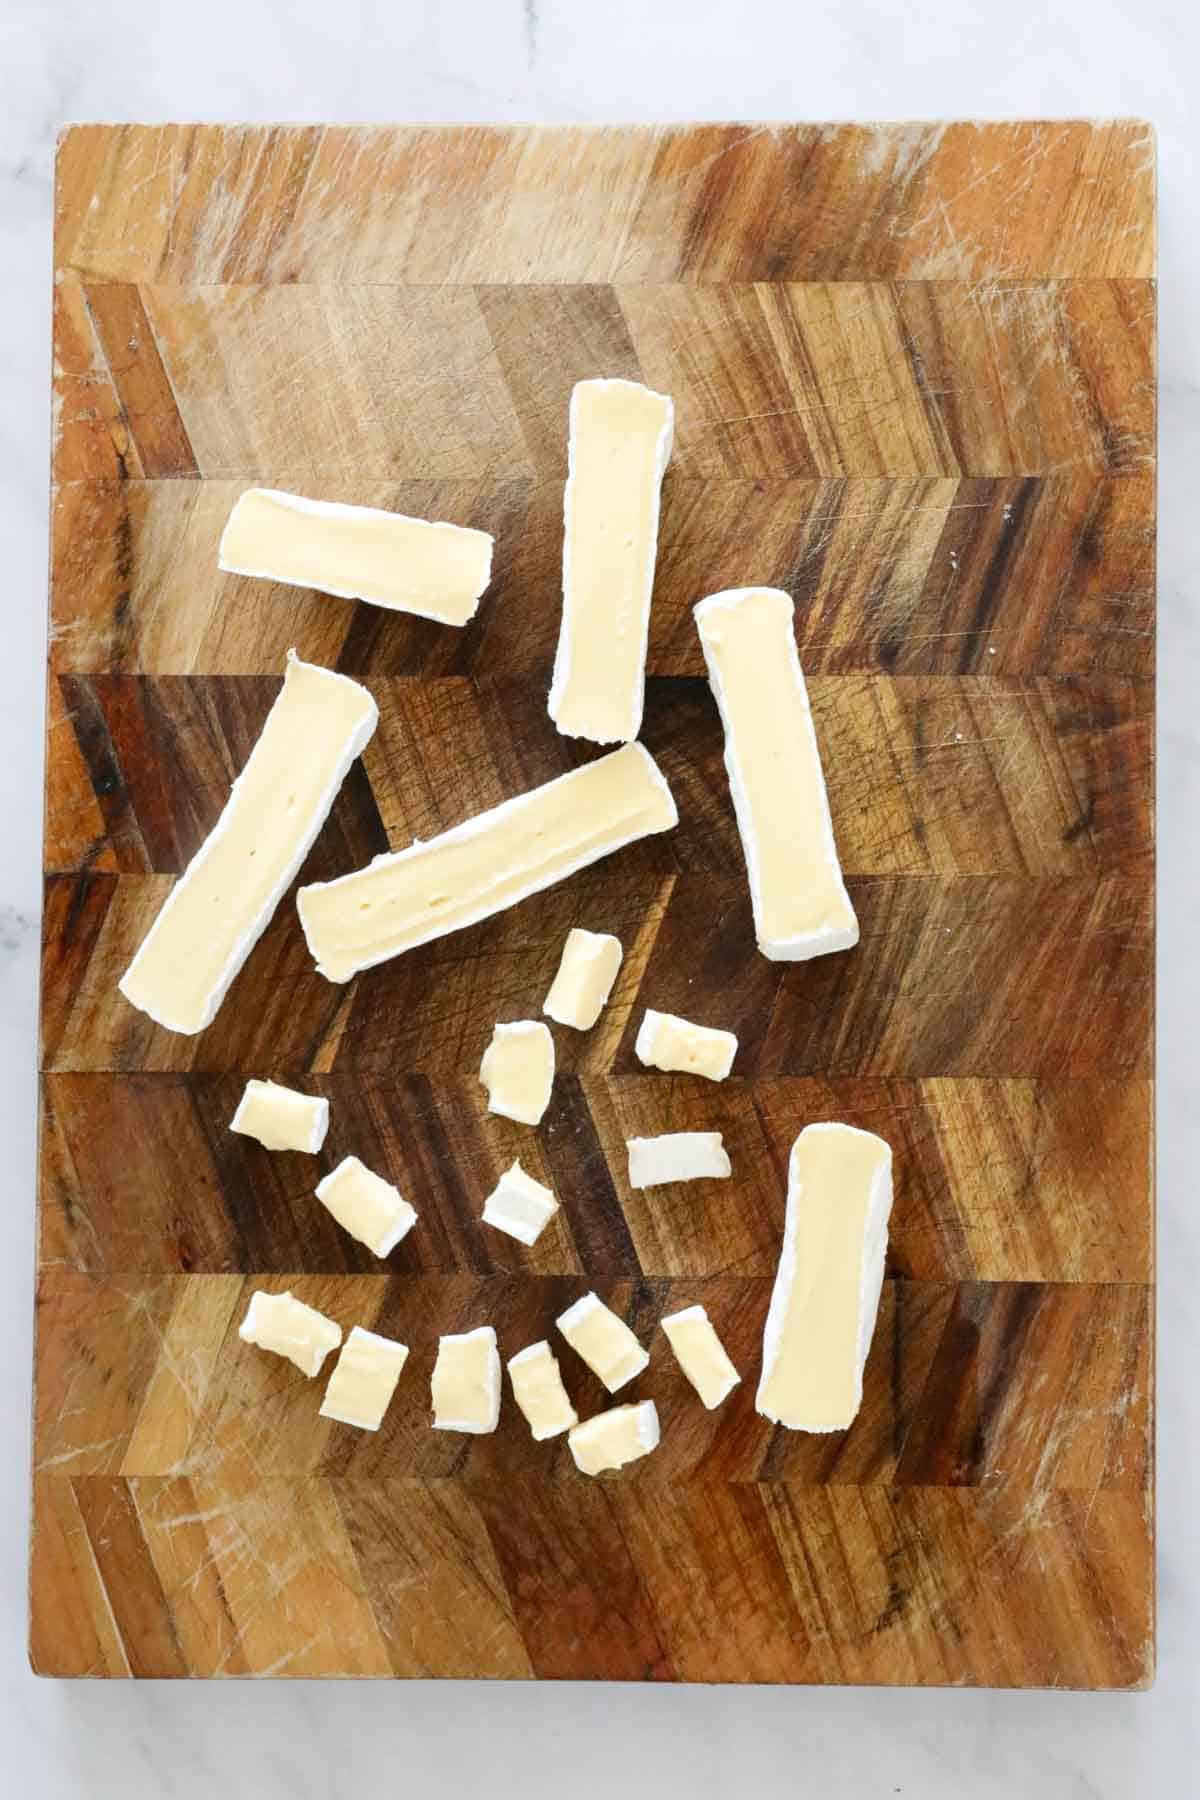 A round of brie cut into little pieces